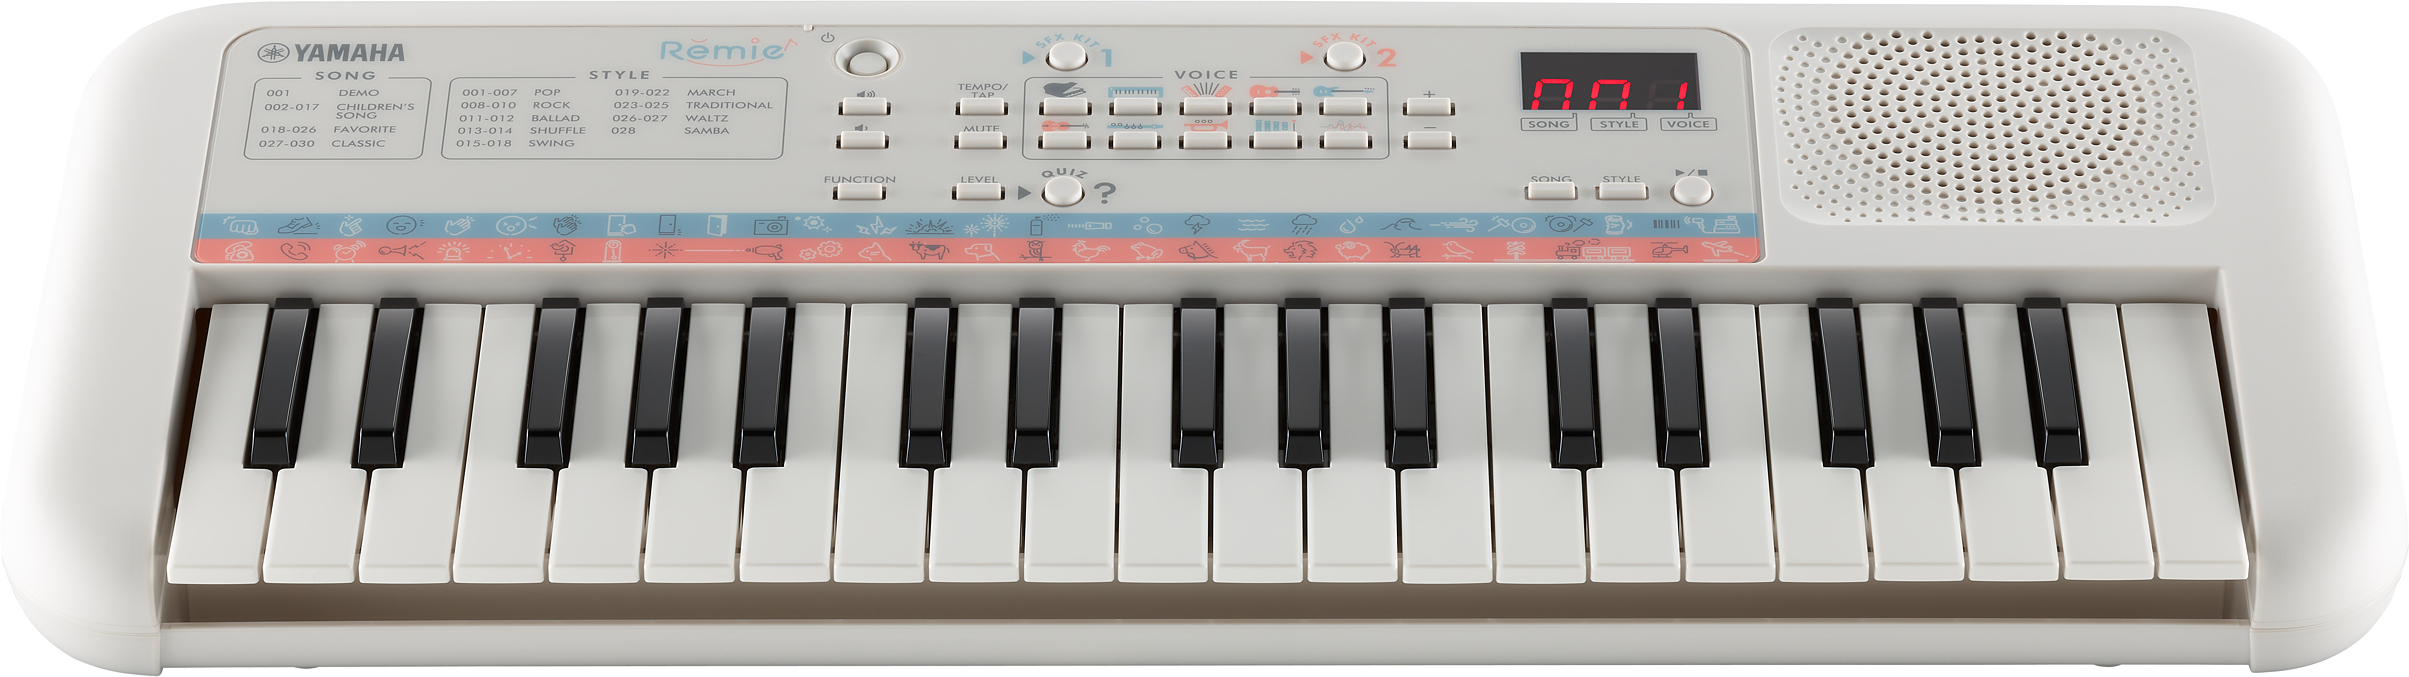 Yamaha Pss-e30 - Entertainer Keyboard - Main picture